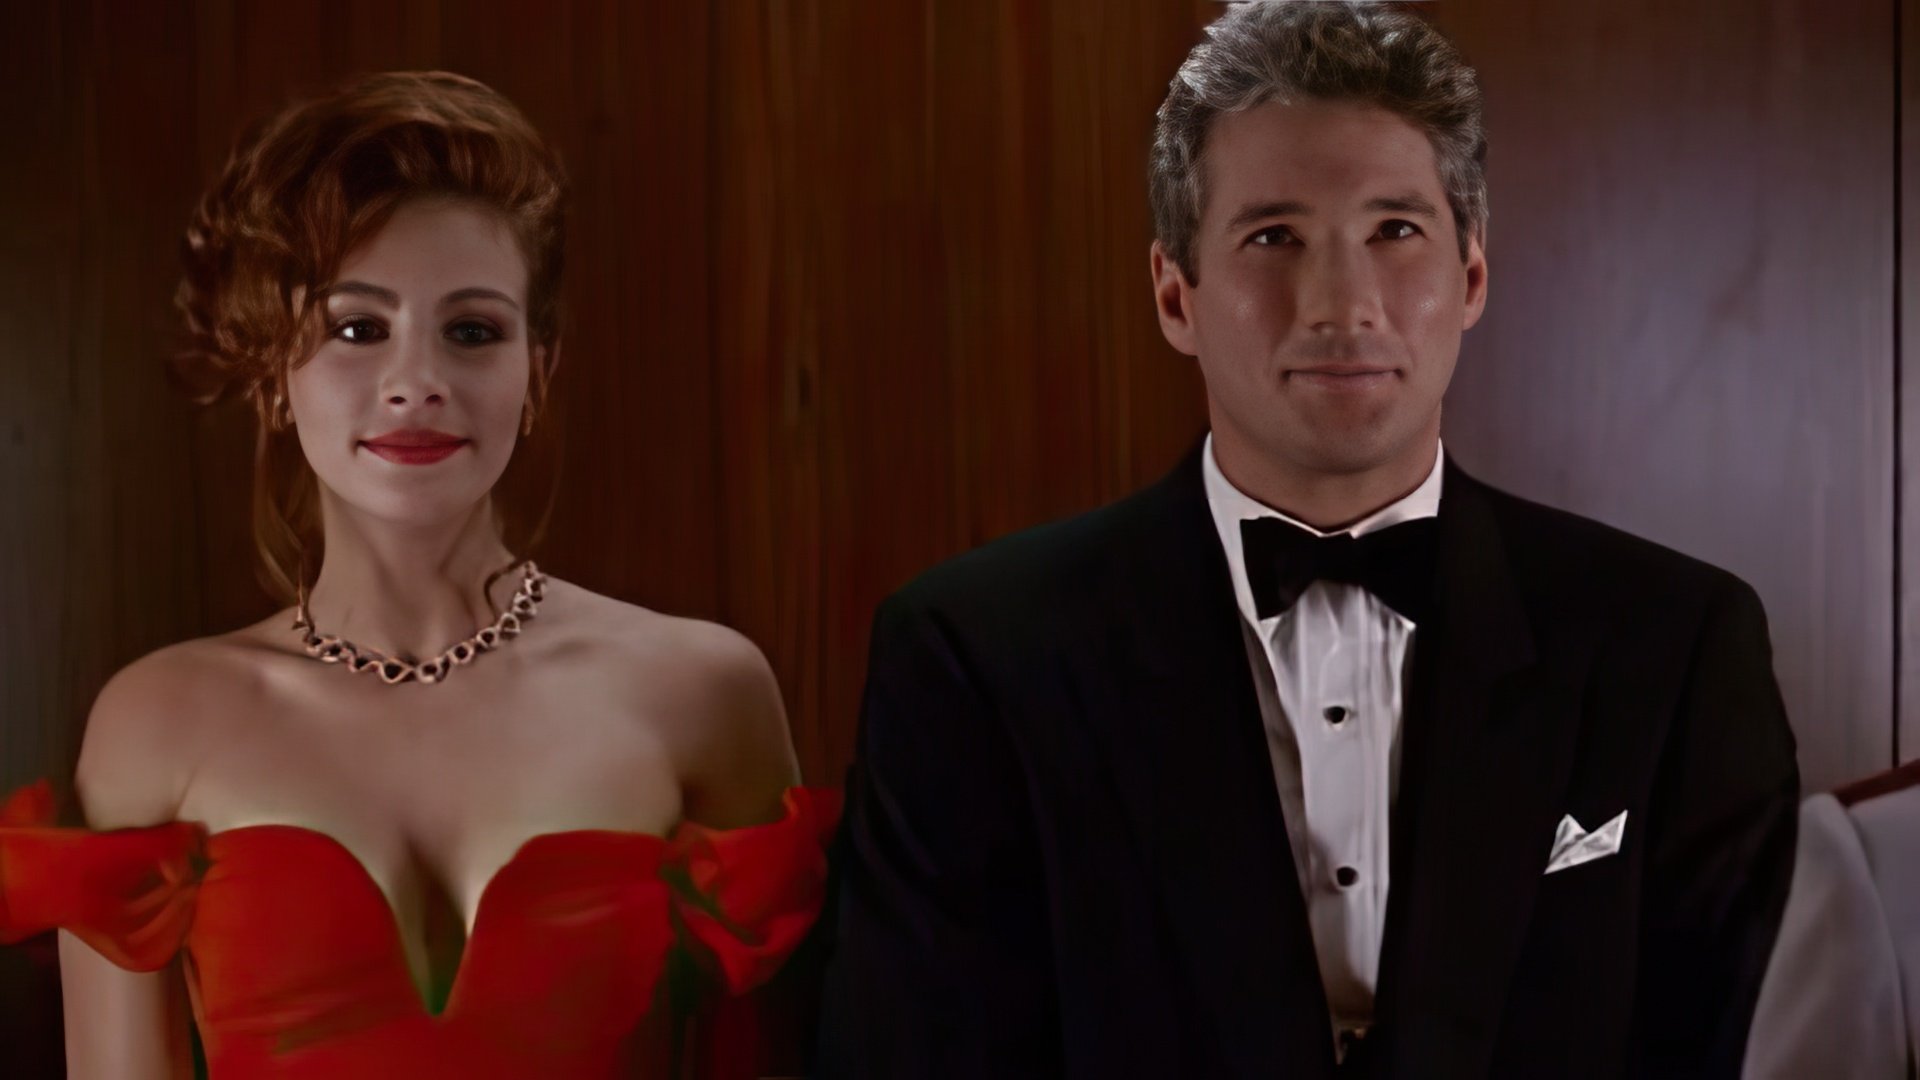 A shot from the Pretty Woman